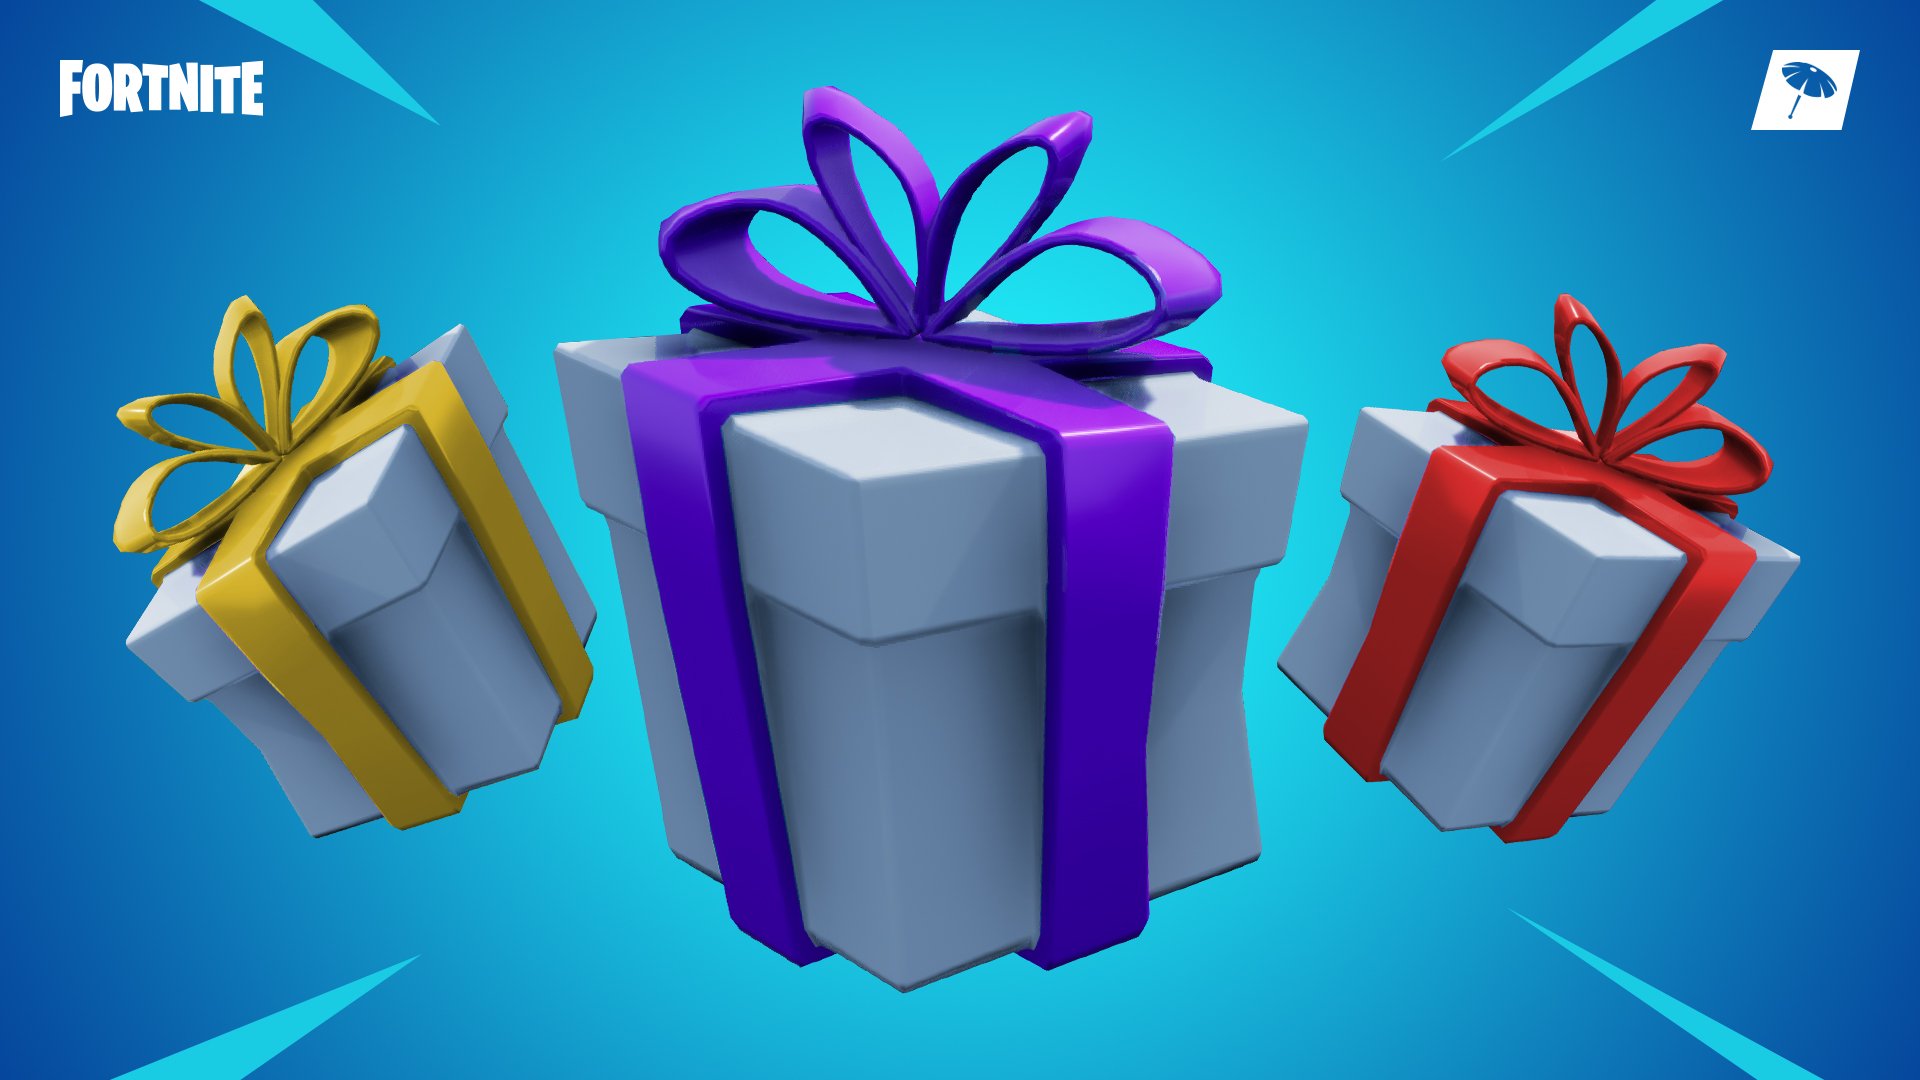 Fortnite Gift feature